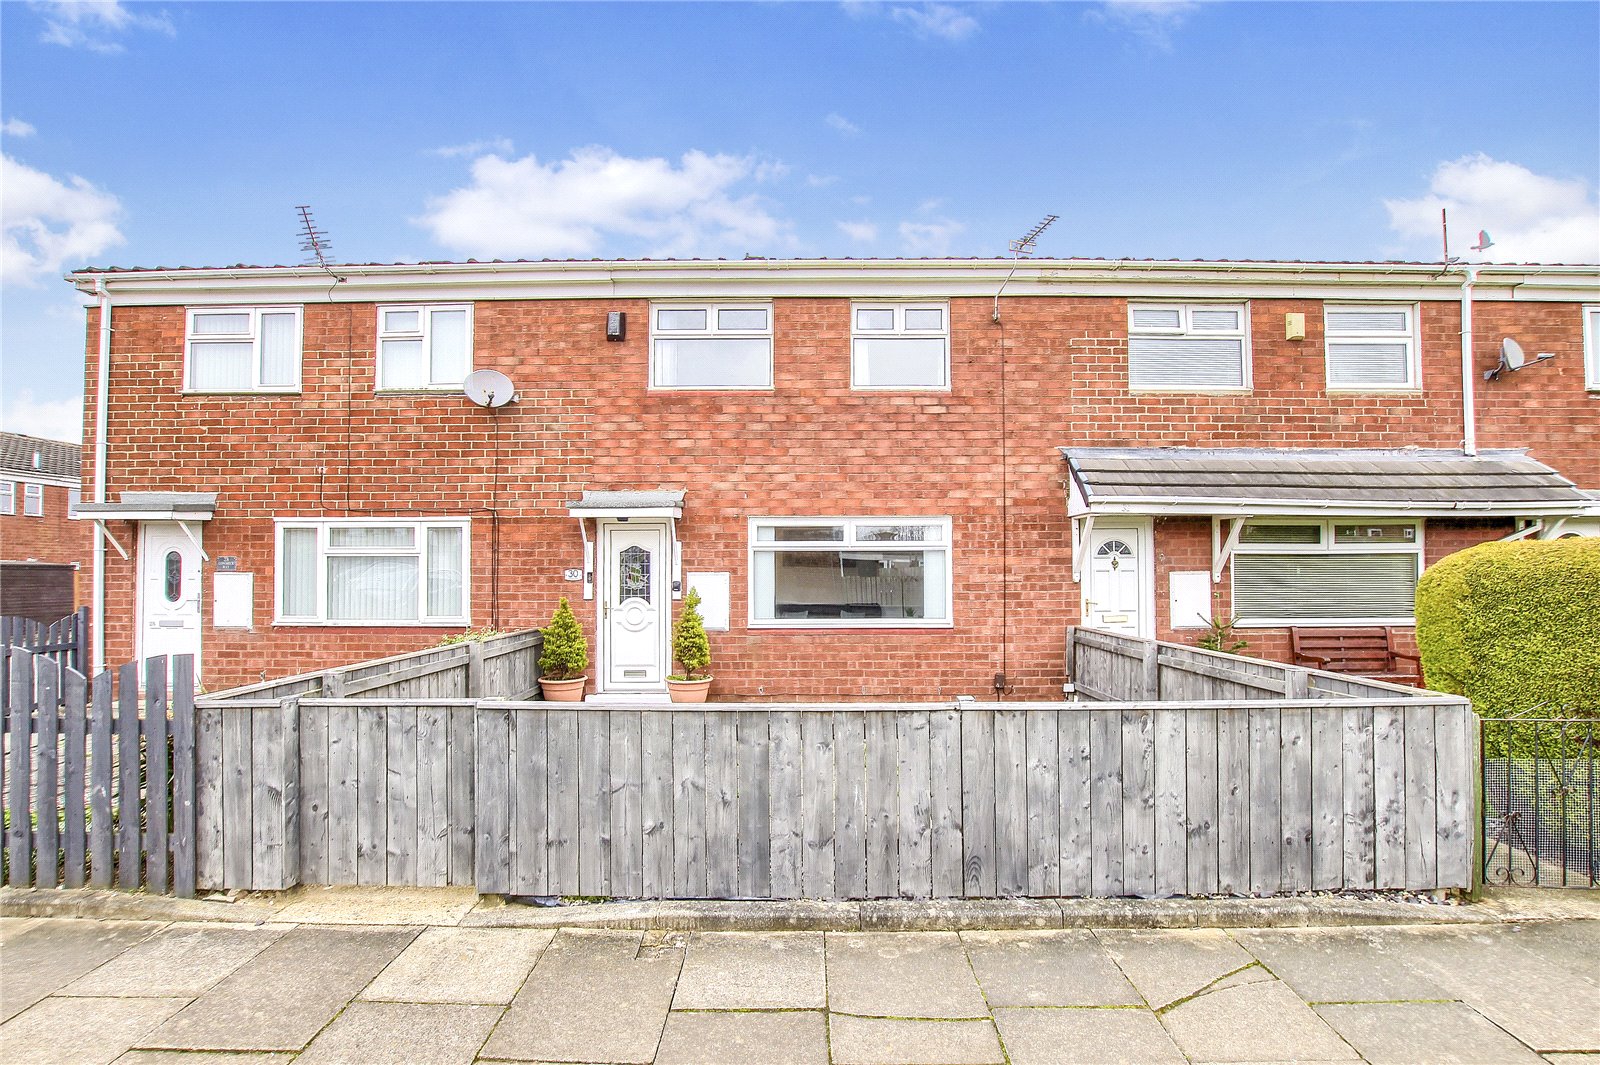 3 bed house for sale in Longbeck Way, Thornaby - Property Image 1